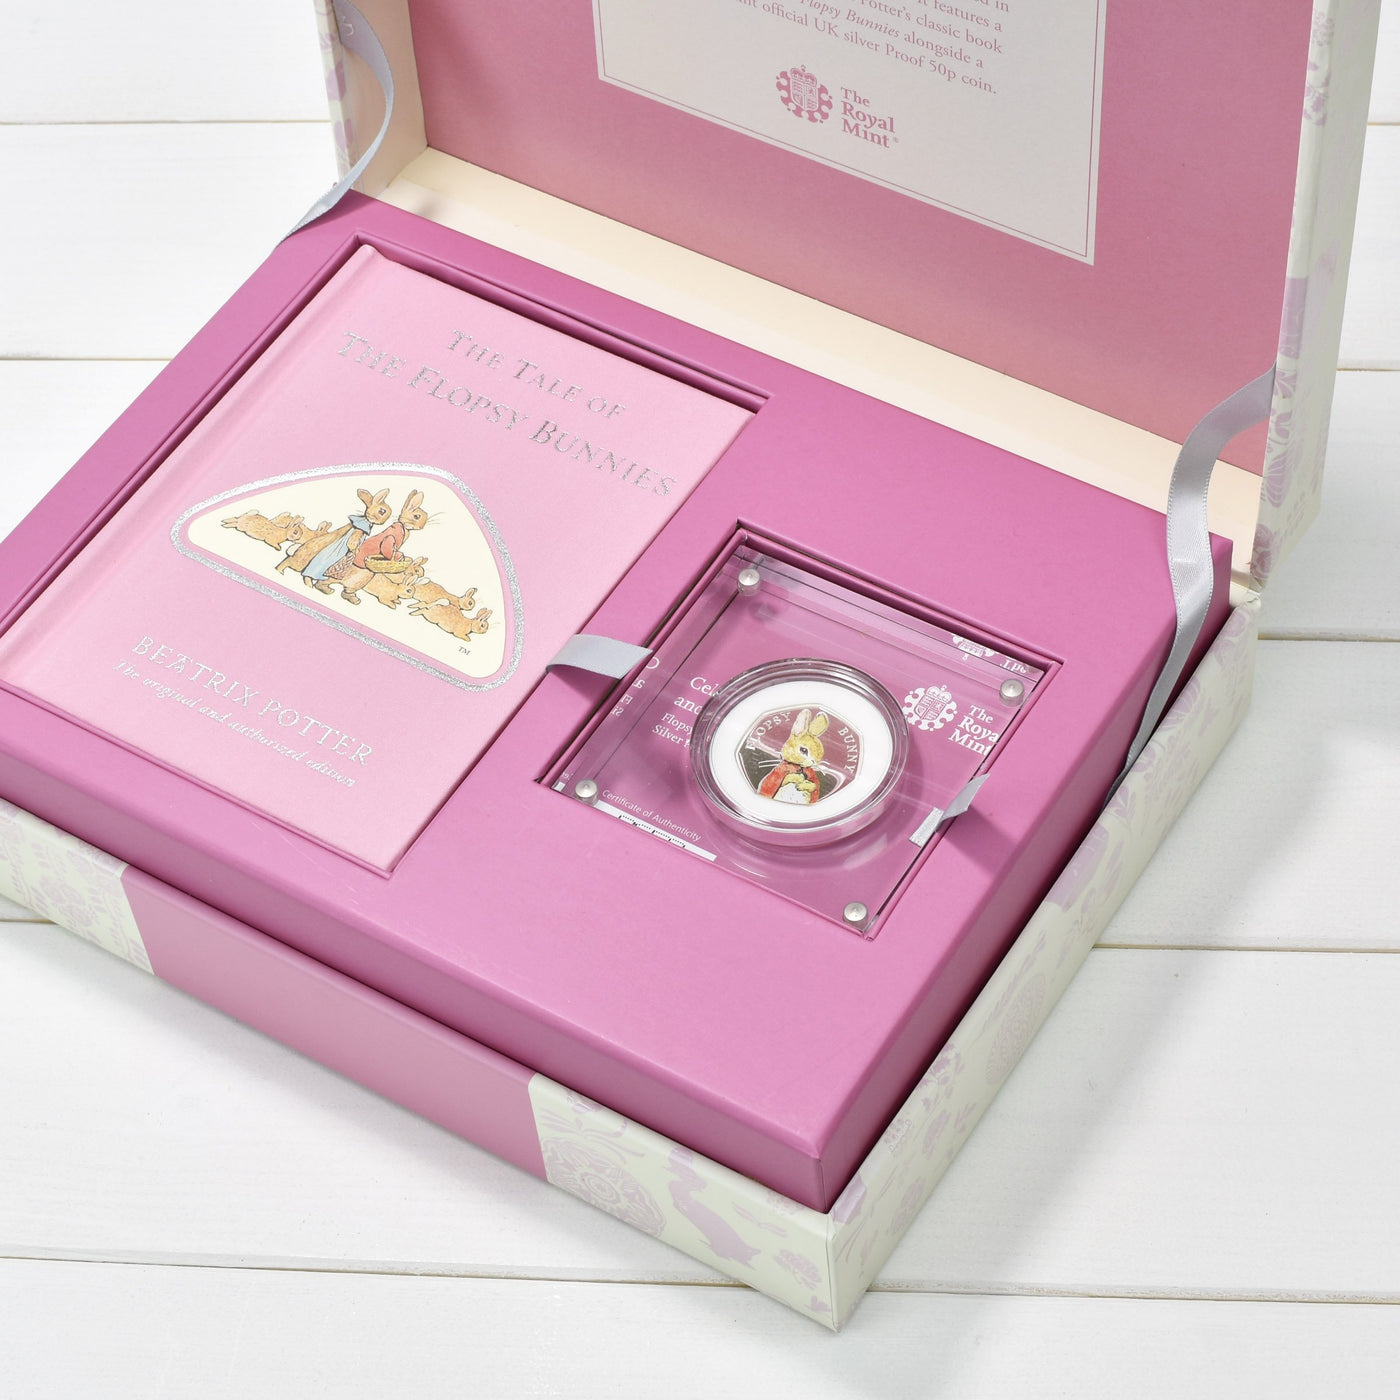 Flopsy Bunny Royal Mint Silver Proof Coin & Book Set - Shop Personalised Gifts